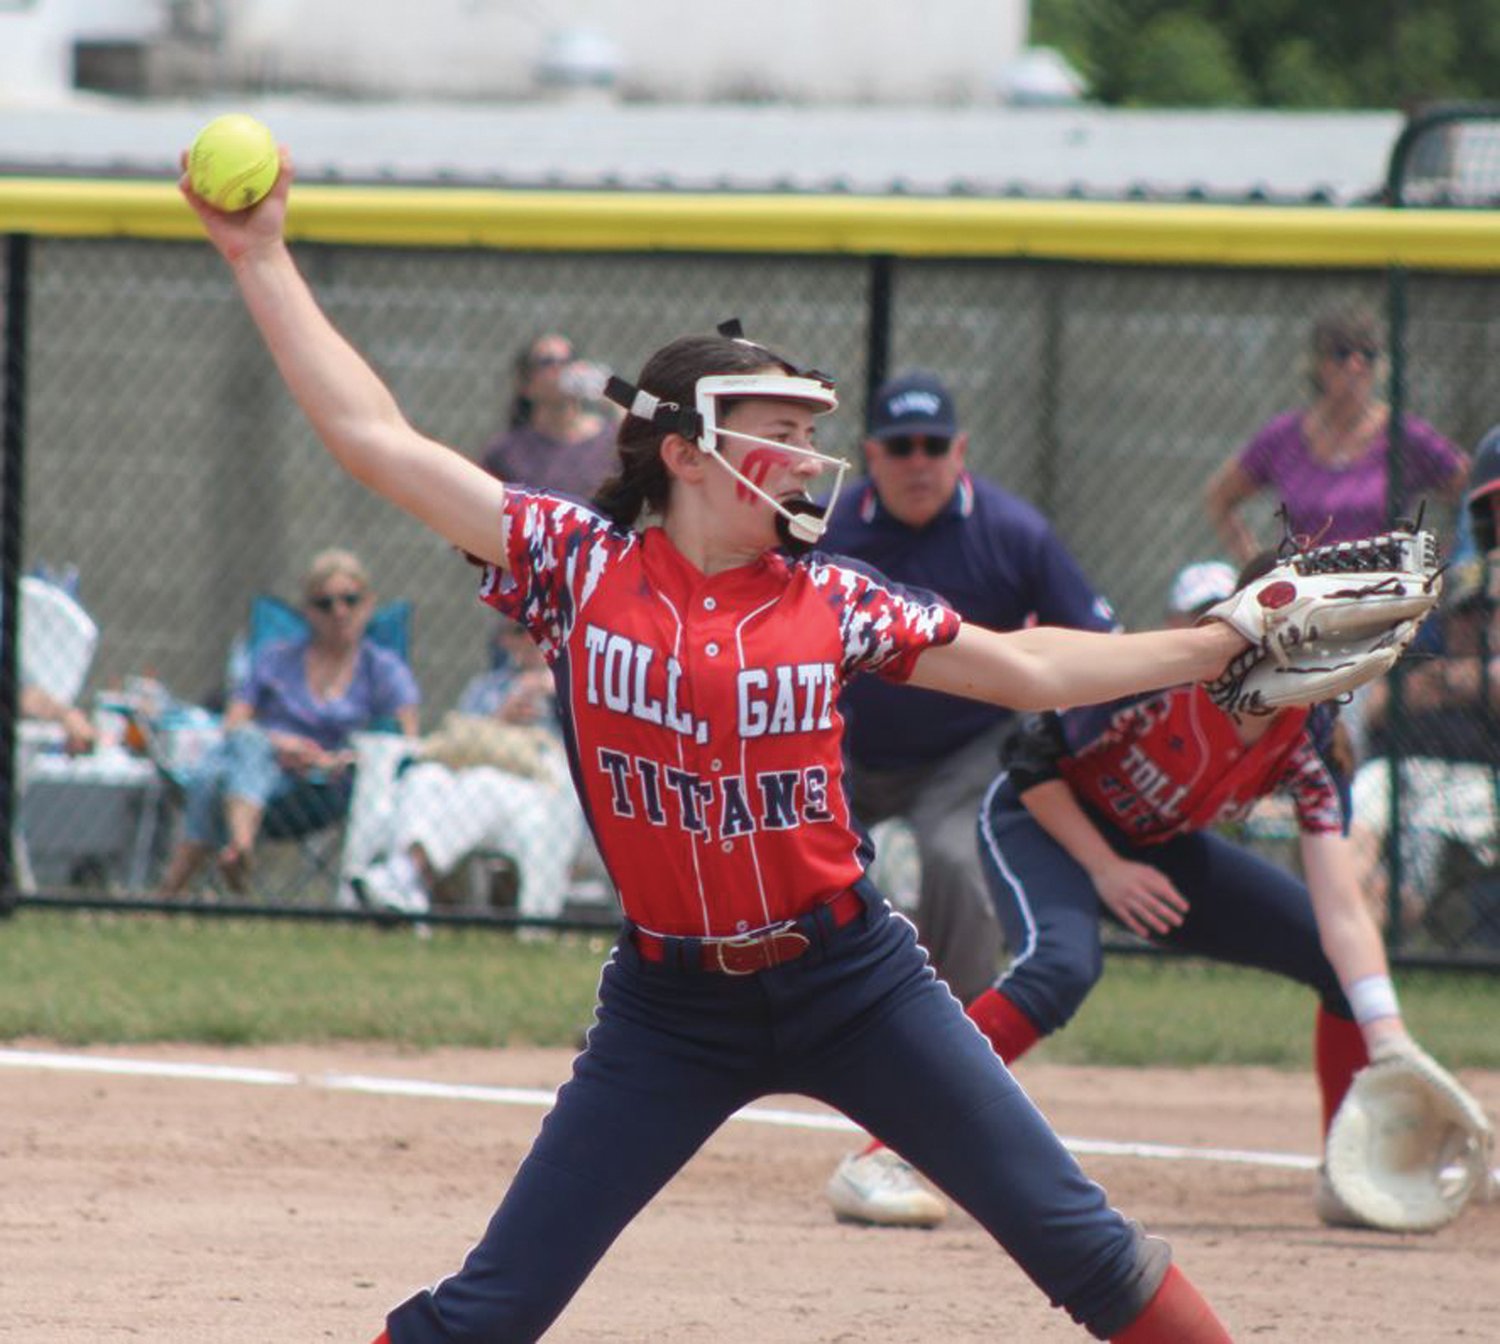 GET READY FOR A PITCH: Toll Gate pitcher Katie Motta delivers on Friday’s game against Mt. Hope. (Warwick Beacon photo).